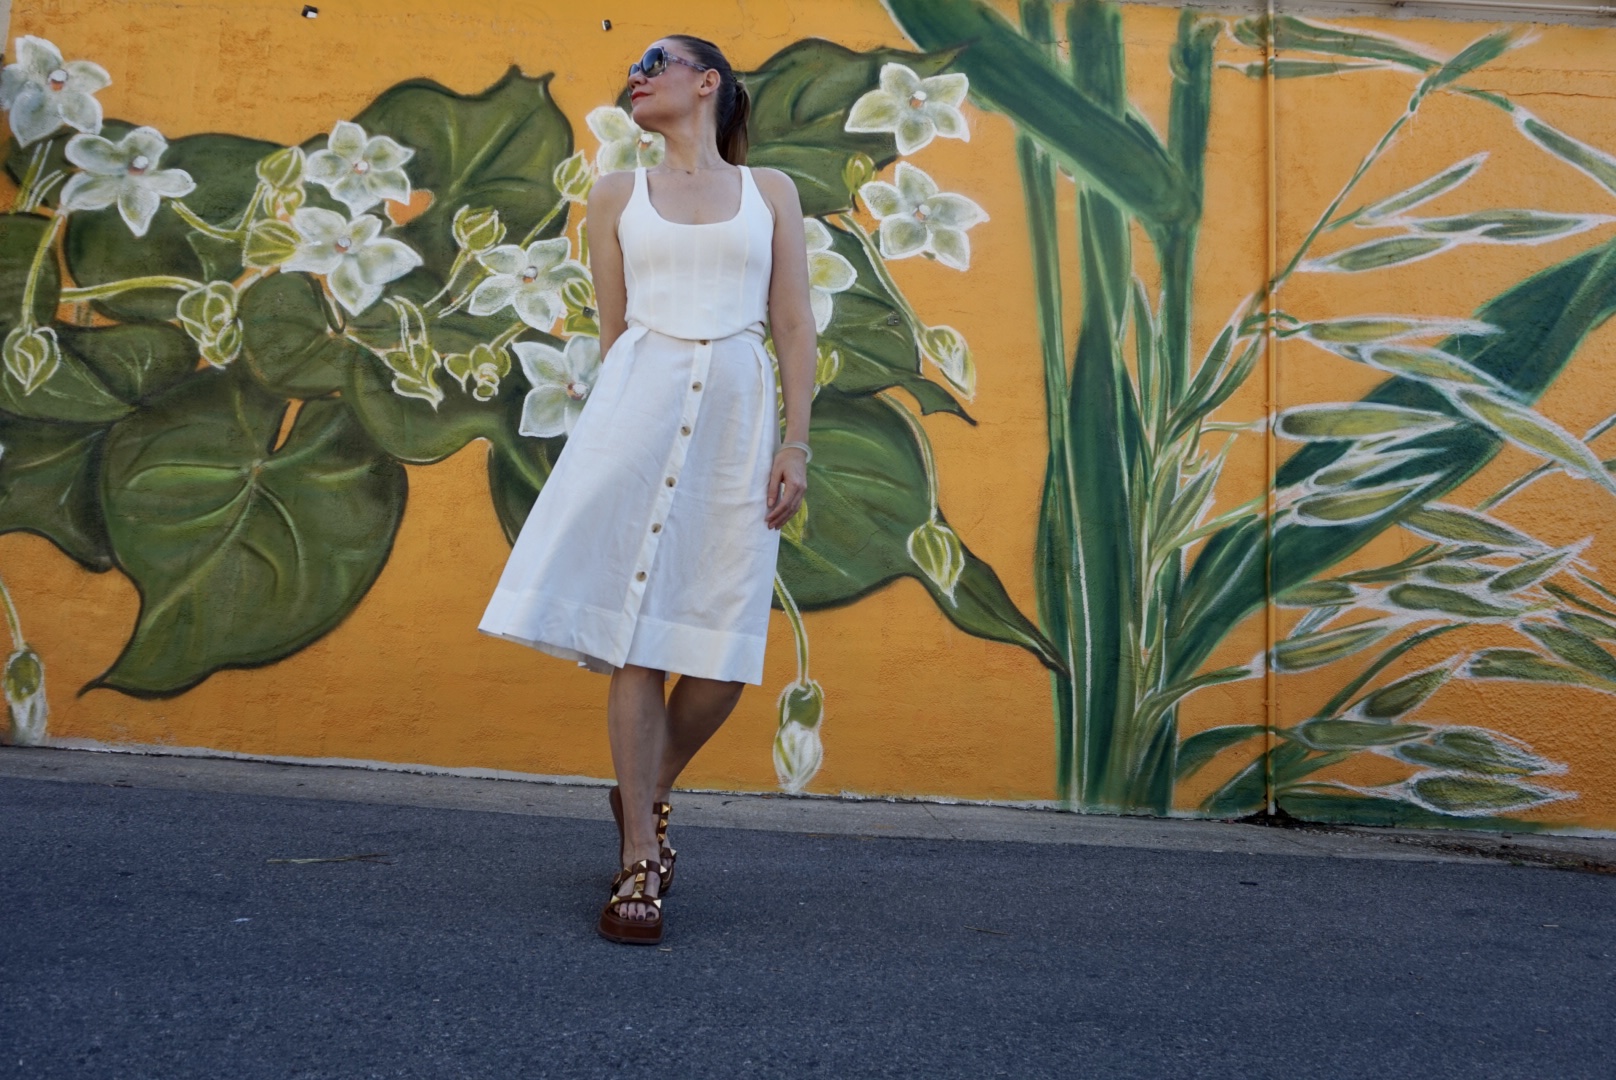 a woman wearing a white skirt and top in front of a yellow wall with painted flowers